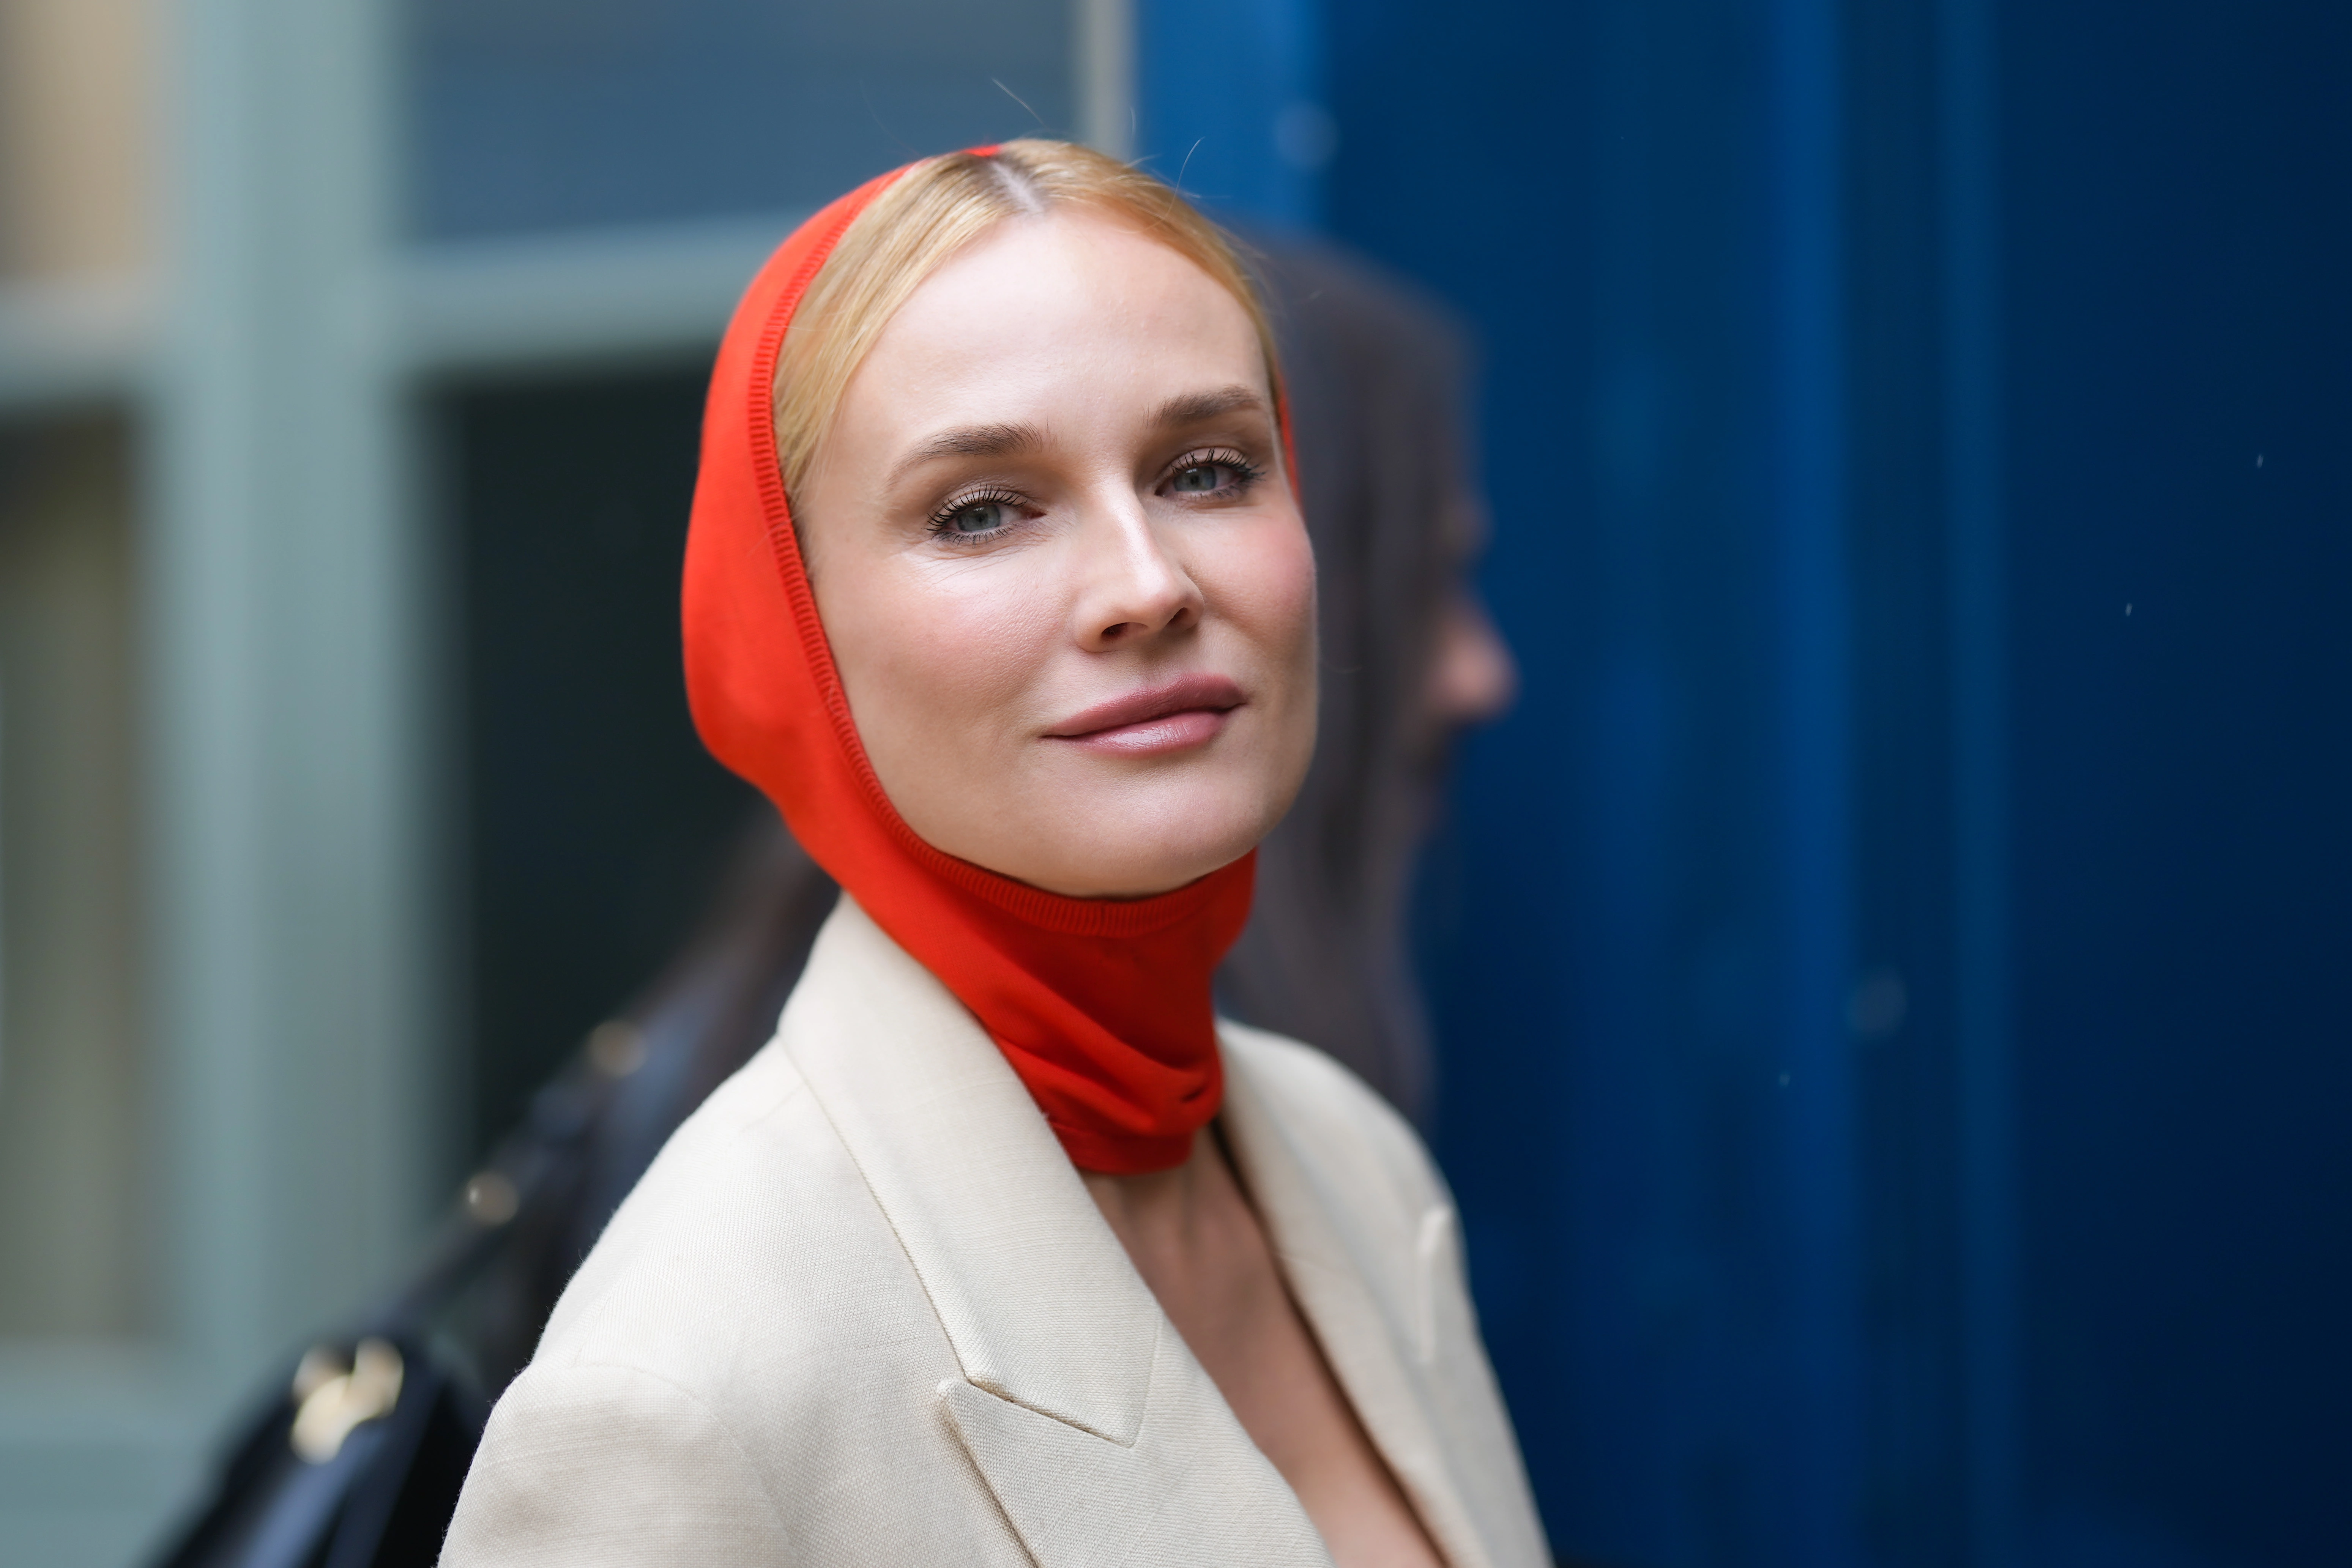 Diane Kruger Will Play 3 Roles in David Cronenberg’s The Shrouds